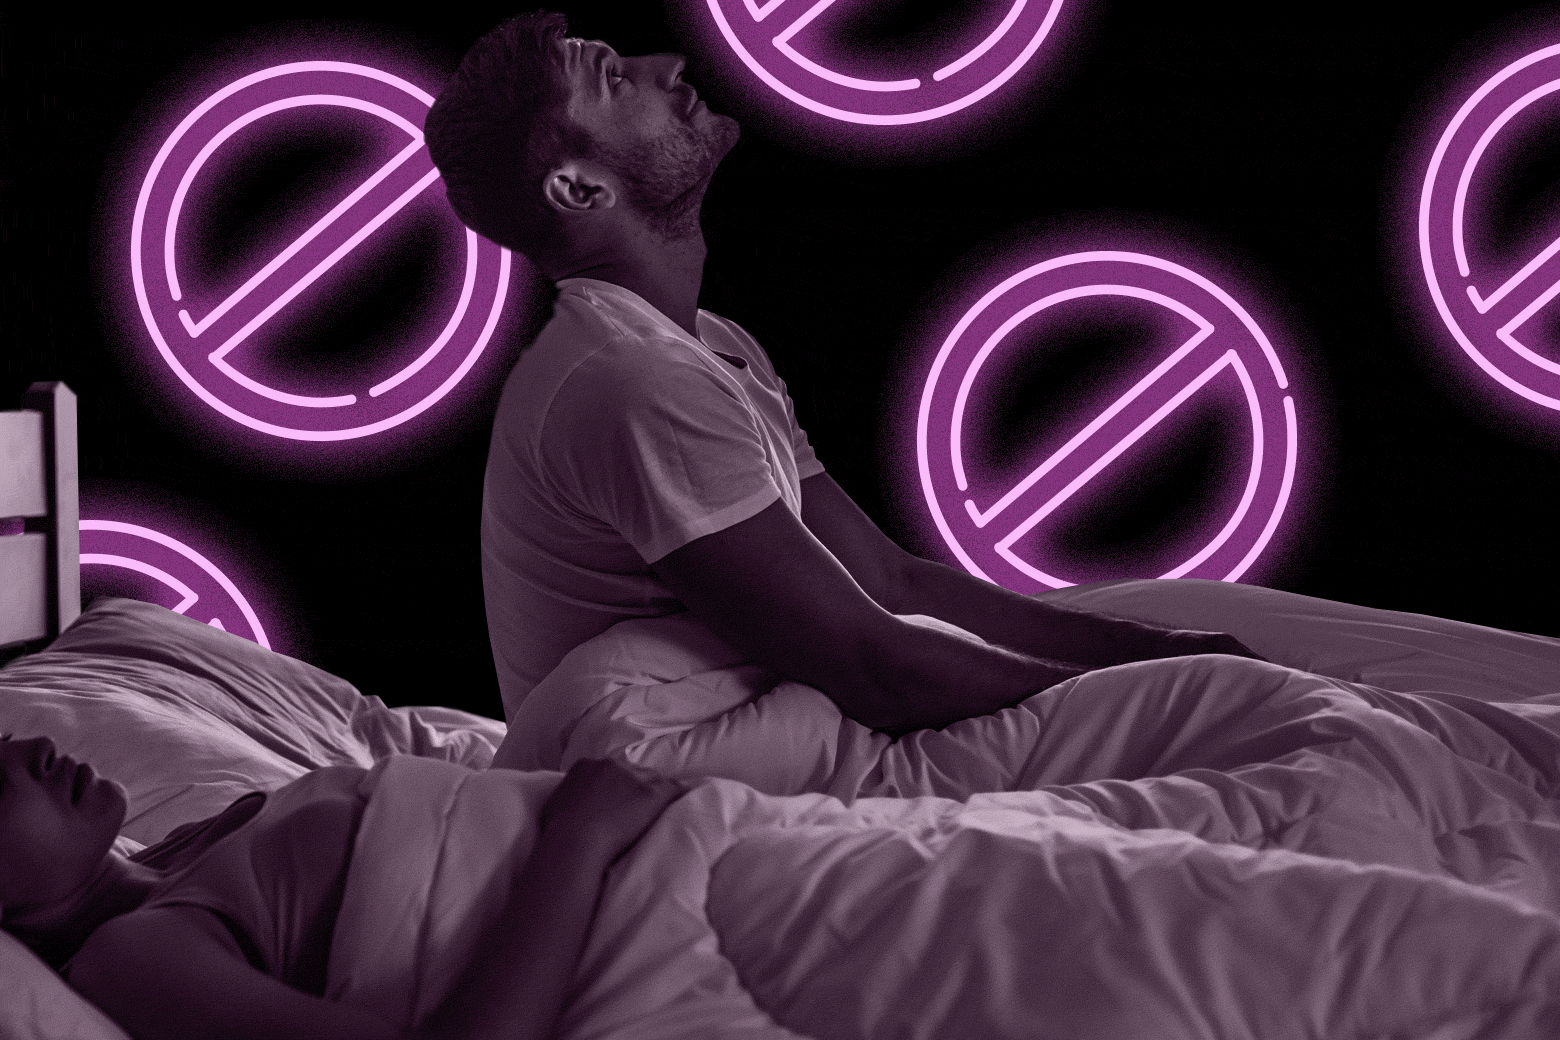 A man sits up in bed next to his sleeping wife, with neon circles with no bars flashing in the background.